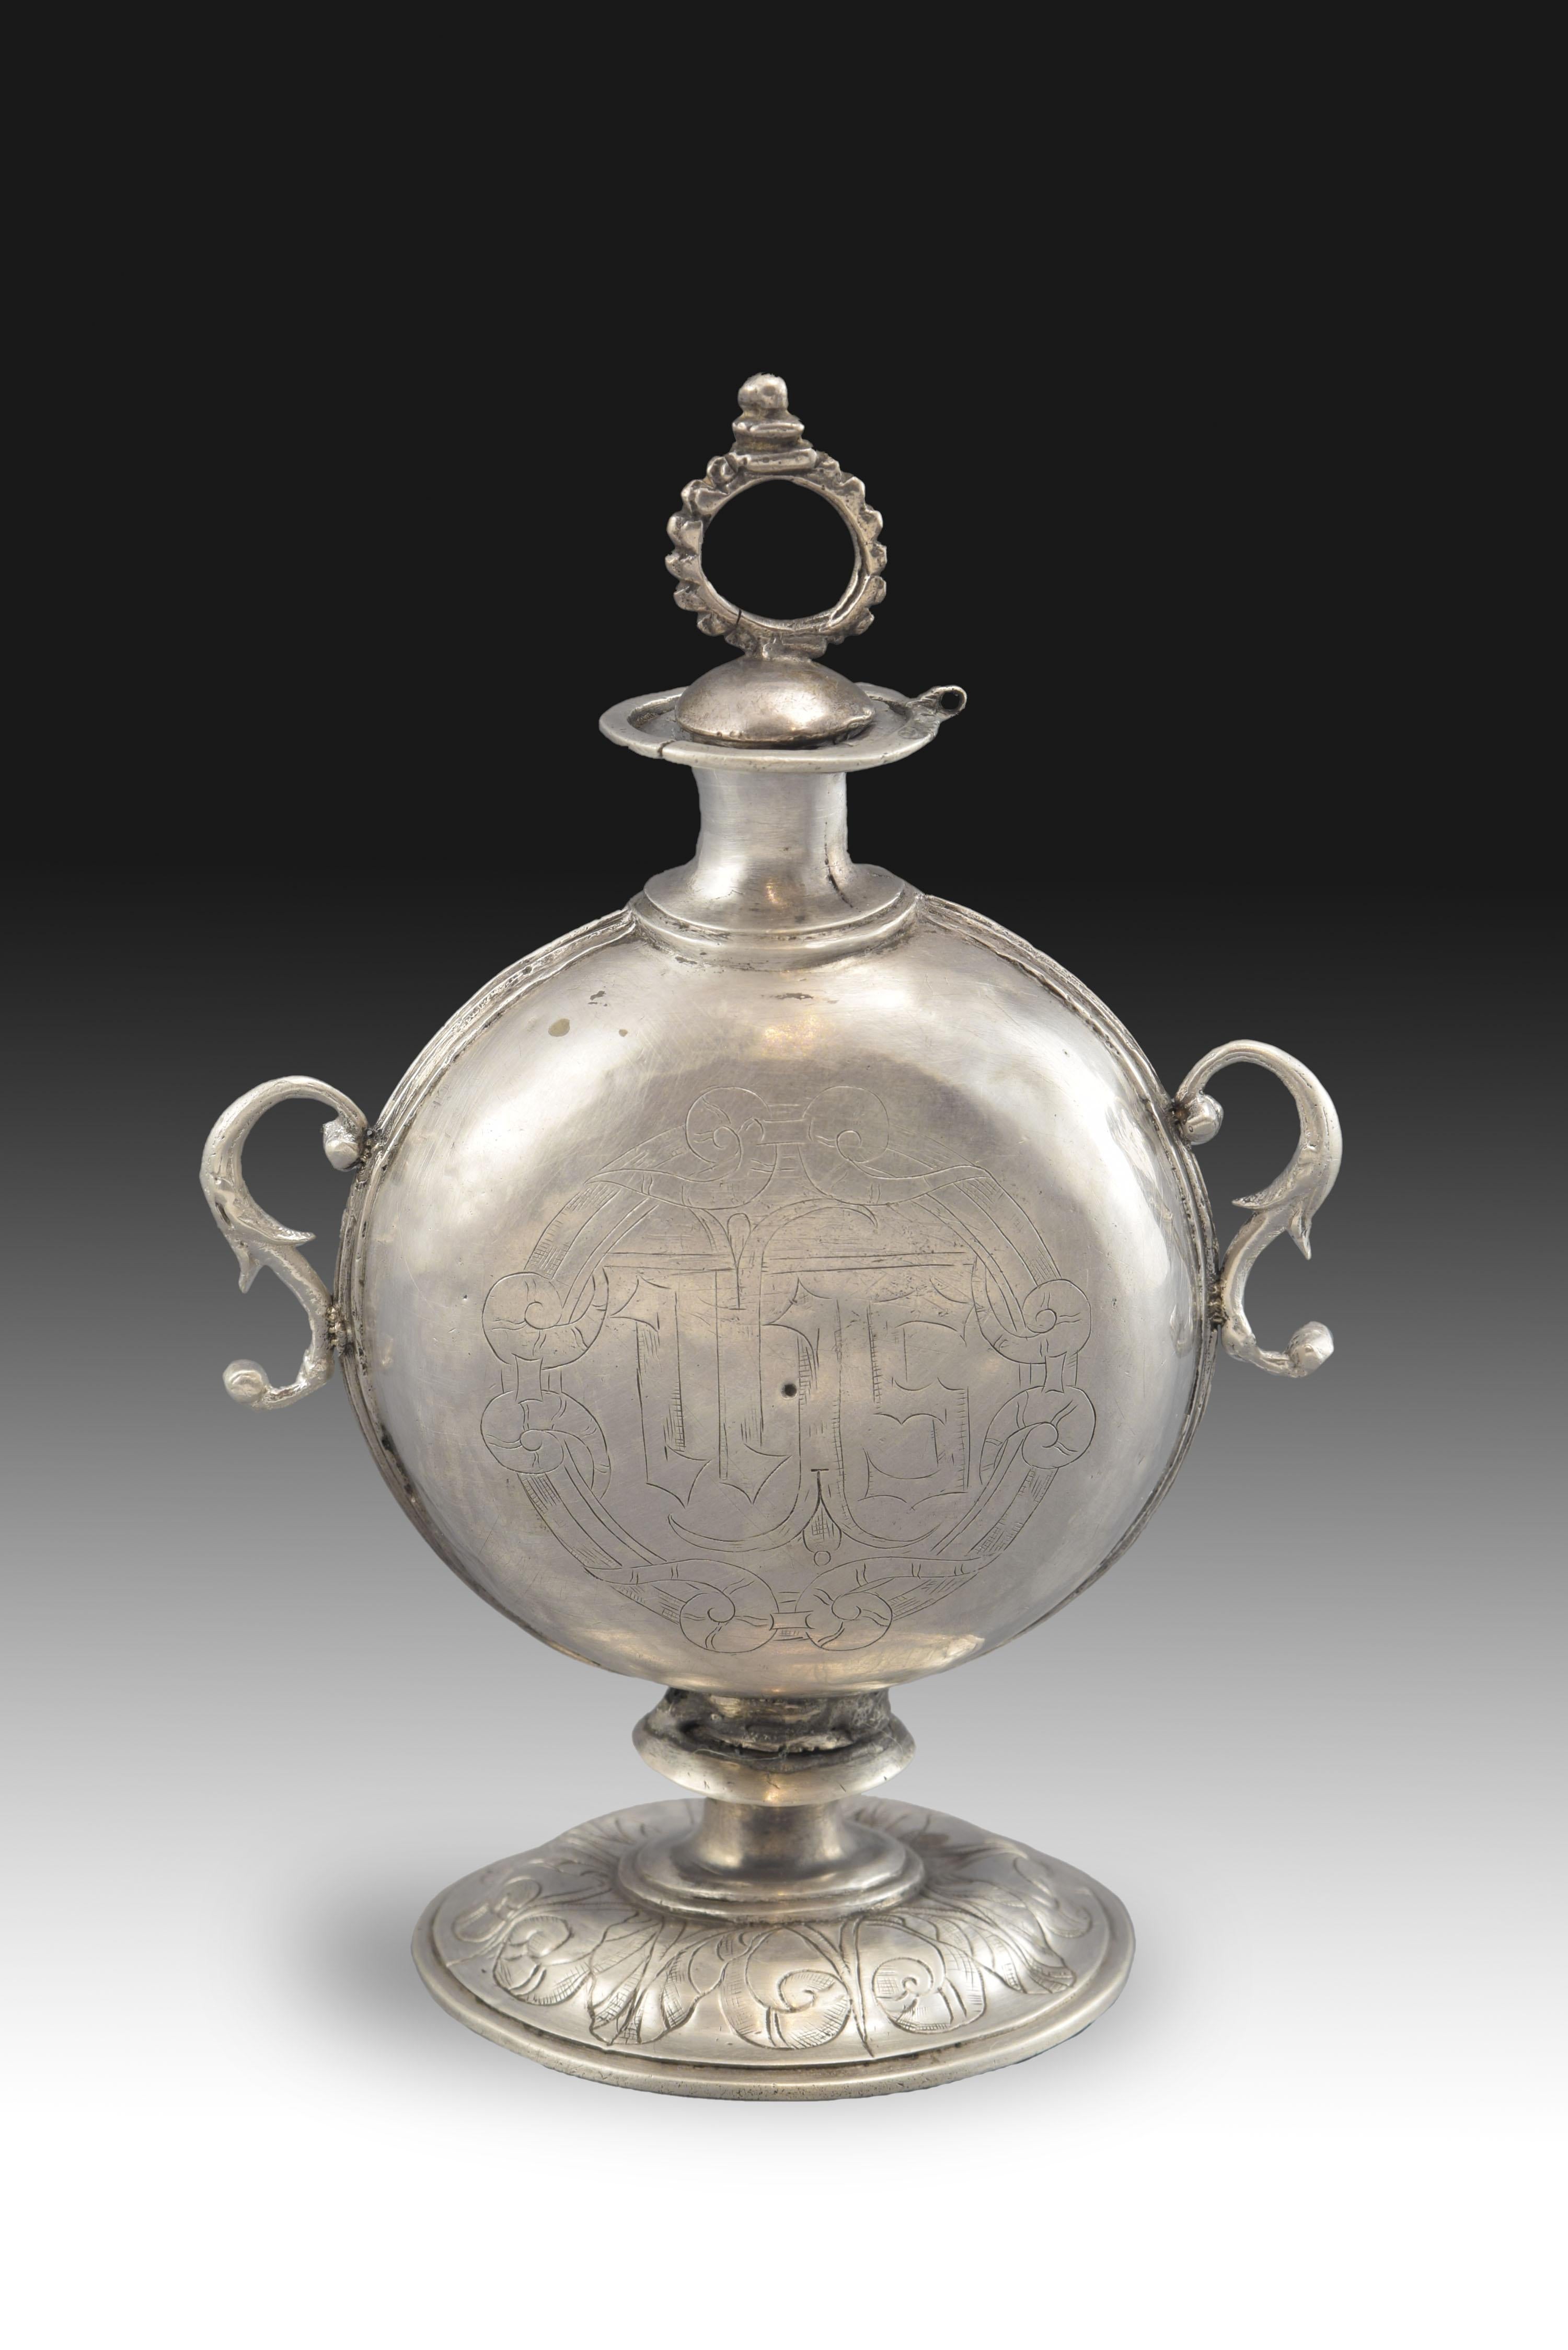 Crismera Silver in its color. 16th century. Cover not original.
Silver chrome in color with a circular foot decorated with an engraved composition of vegetable elements and a flat circular body with two 